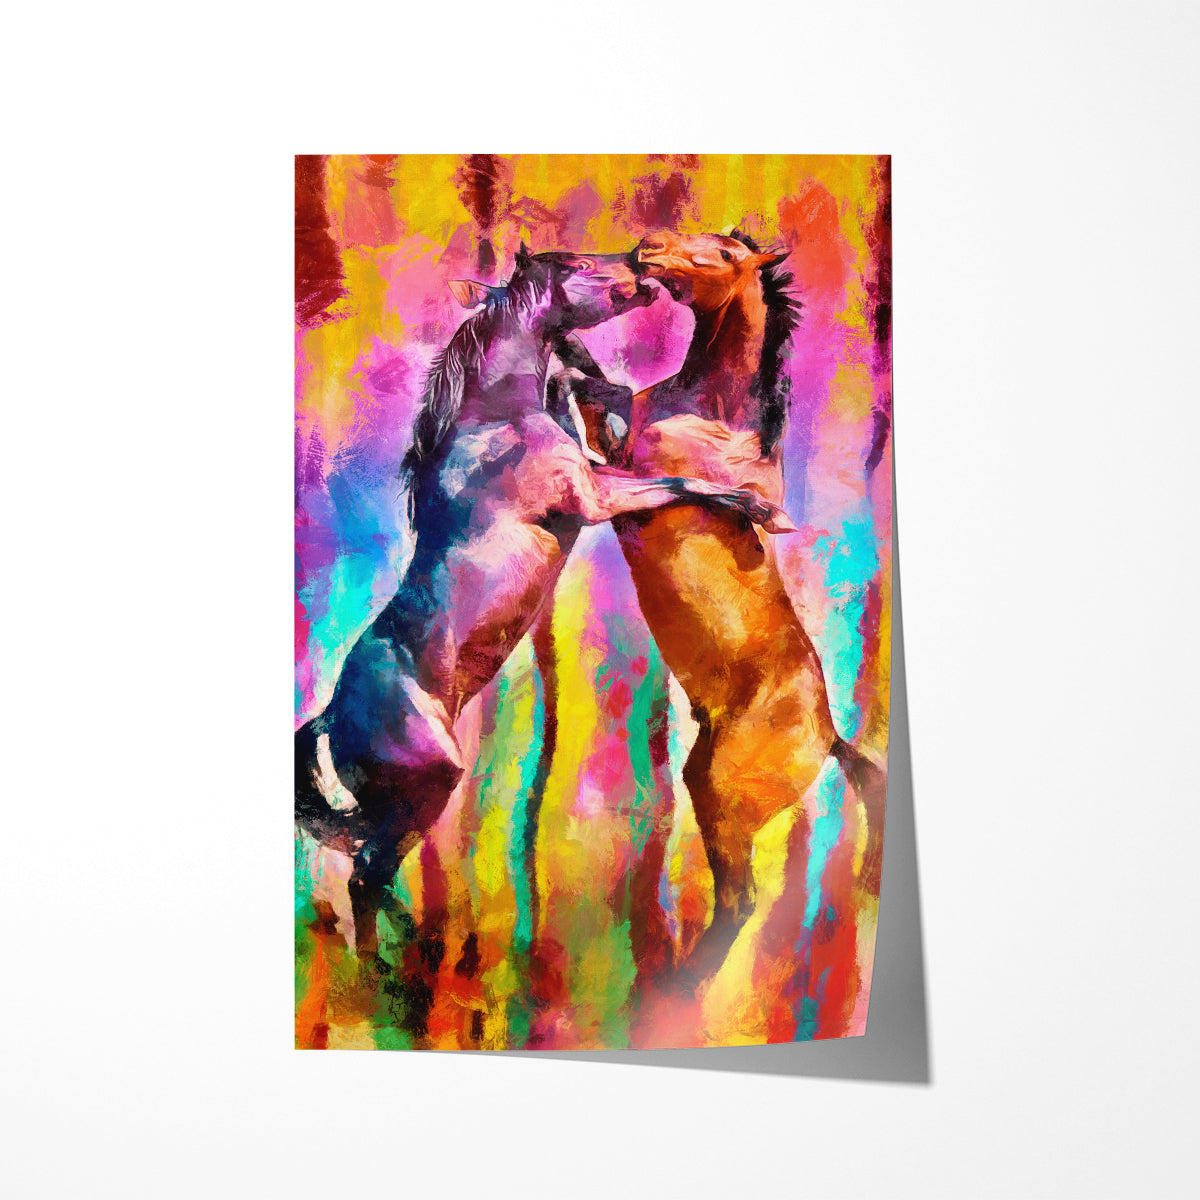 Wild Horses Multicolored Abstract Art Poster For Wall Decor-Vertical Posters NOT FRAMED-CetArt-8″x10″ inches-CetArt